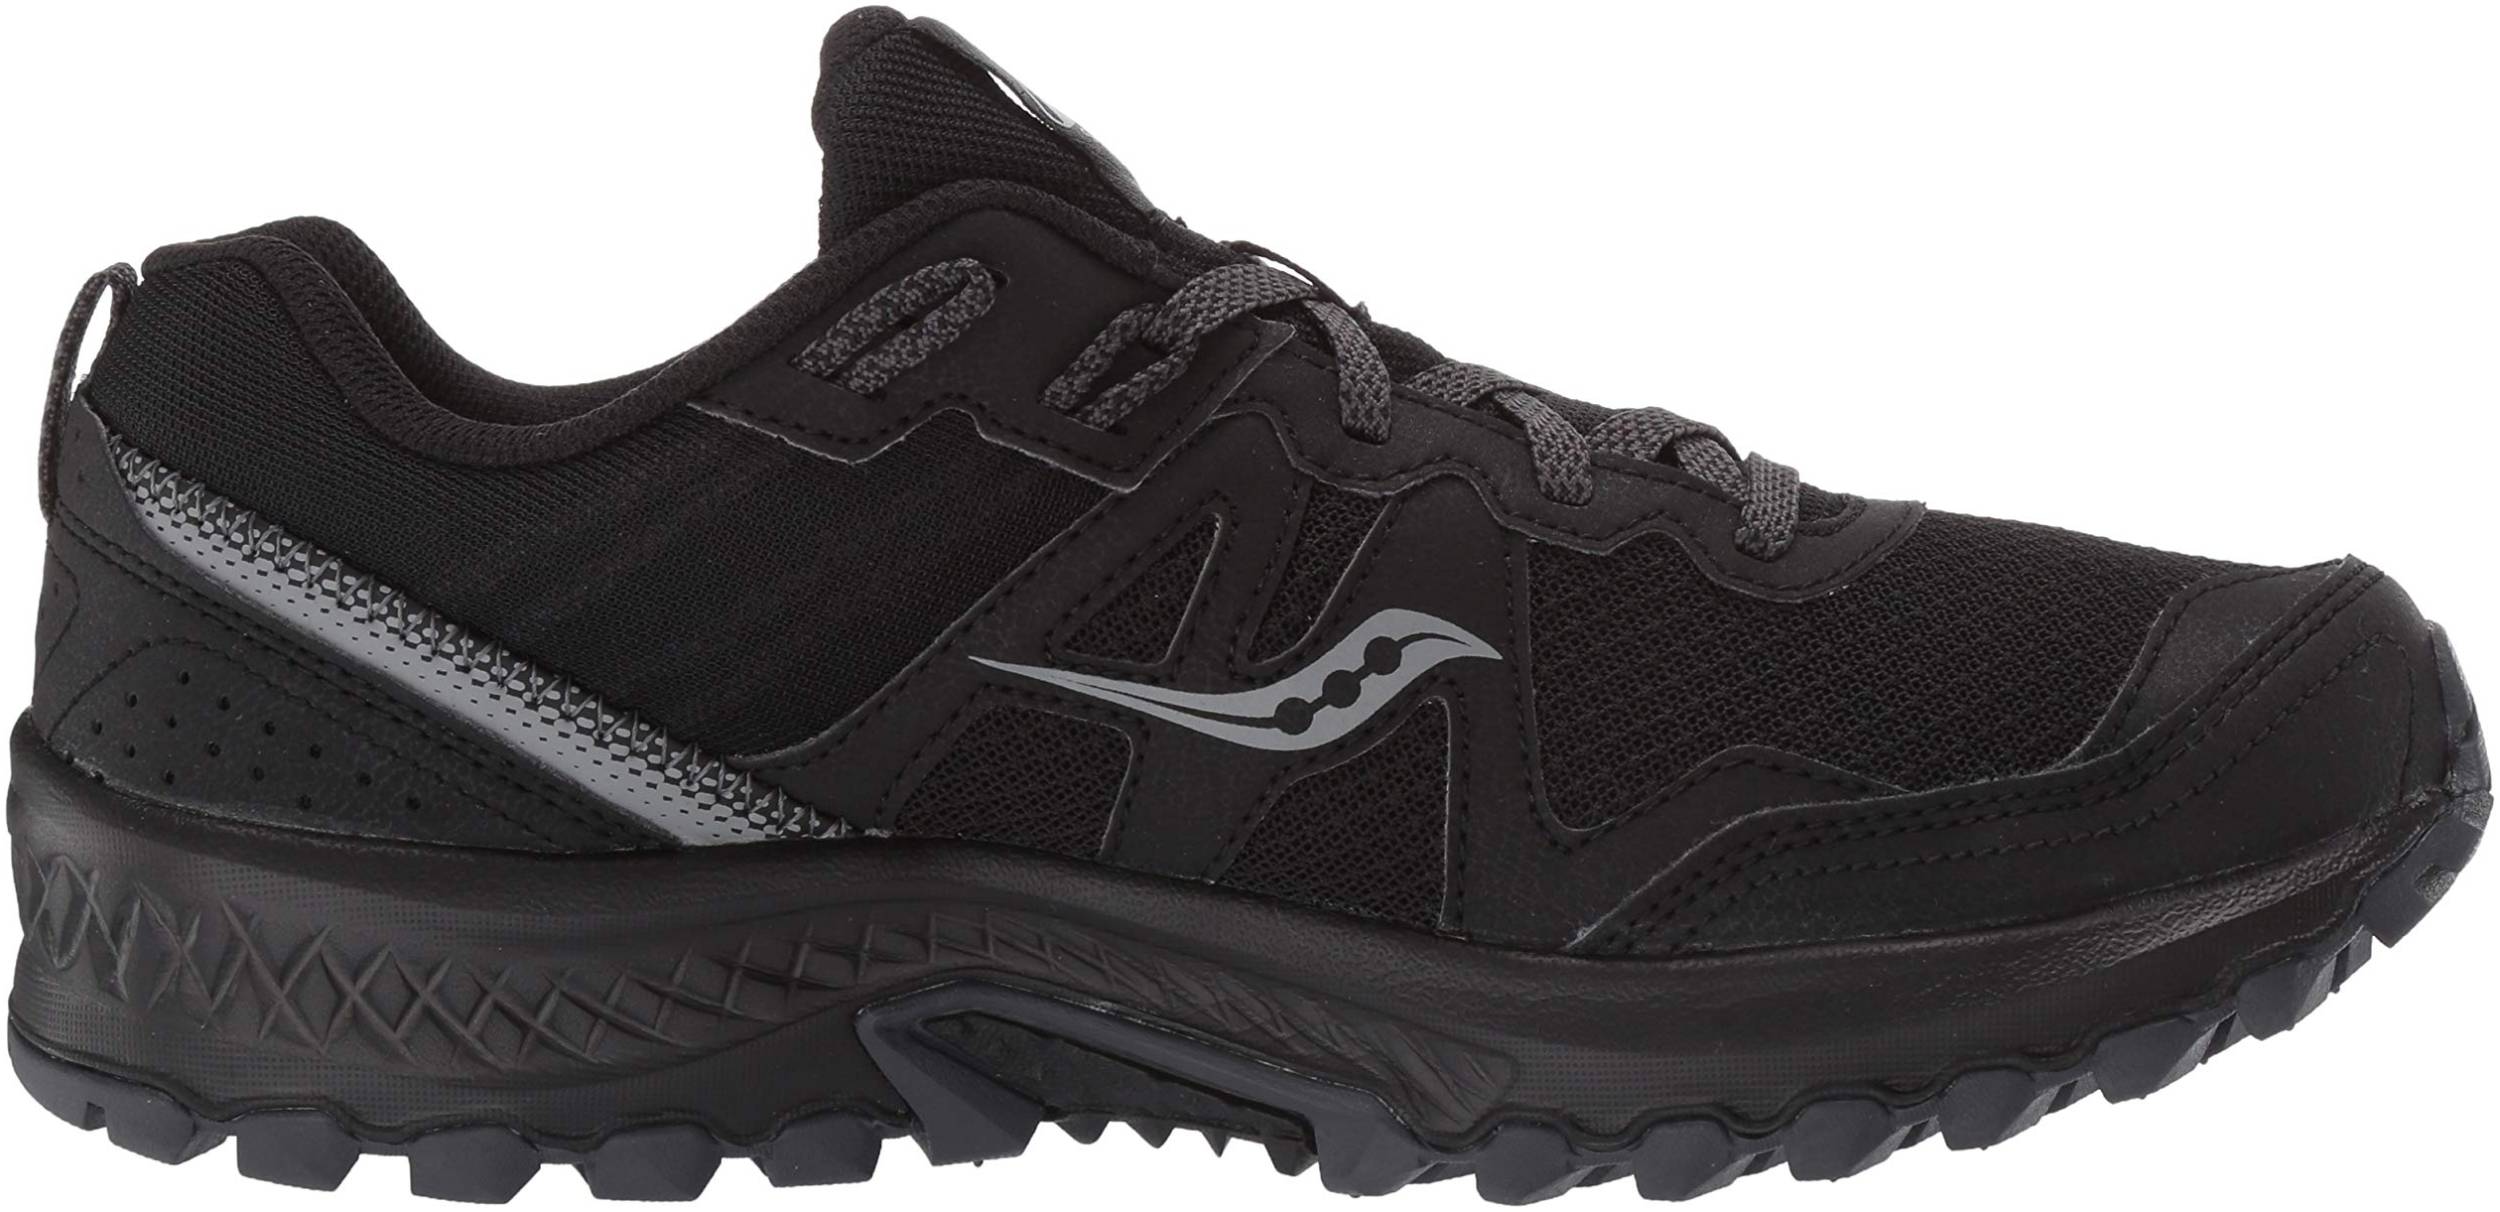 Saucony Mens Excursion Tr 13 Trail Running Shoes